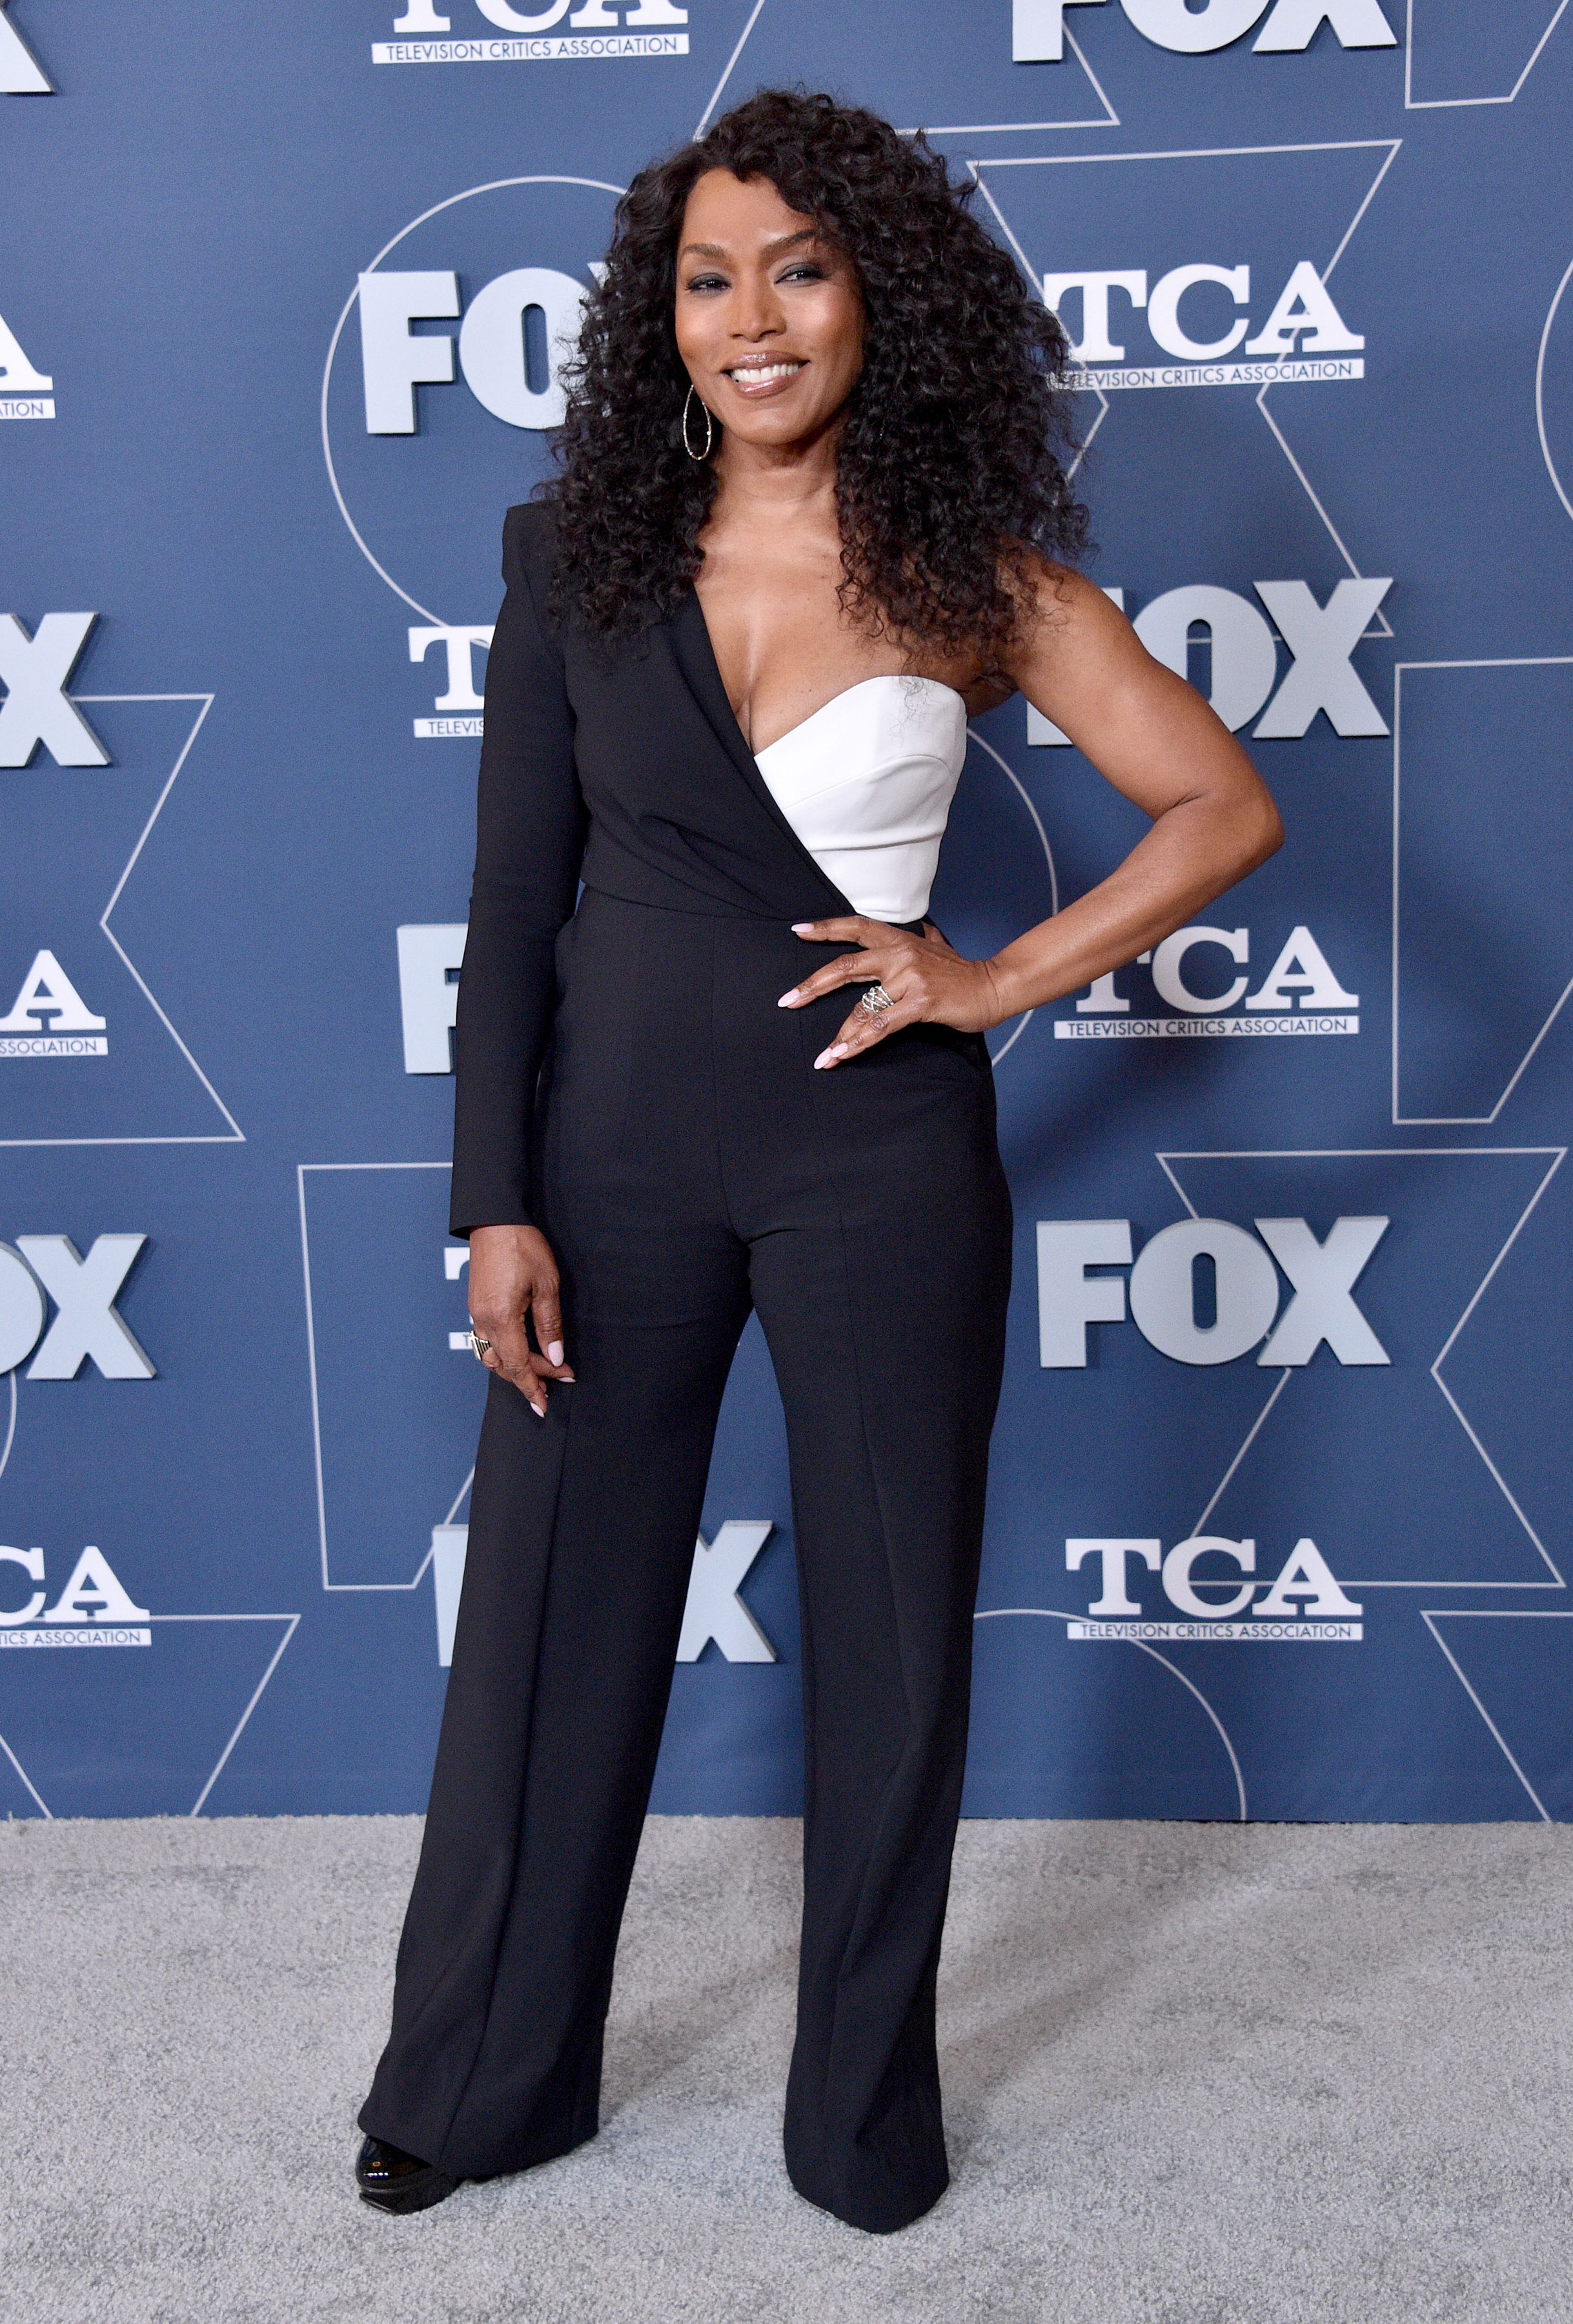 Angela Bassett during the FOX Winter TCA All Star Party at The Langham Huntington, Pasadena on January 07, 2020 in Pasadena, California. | Source: Getty Images